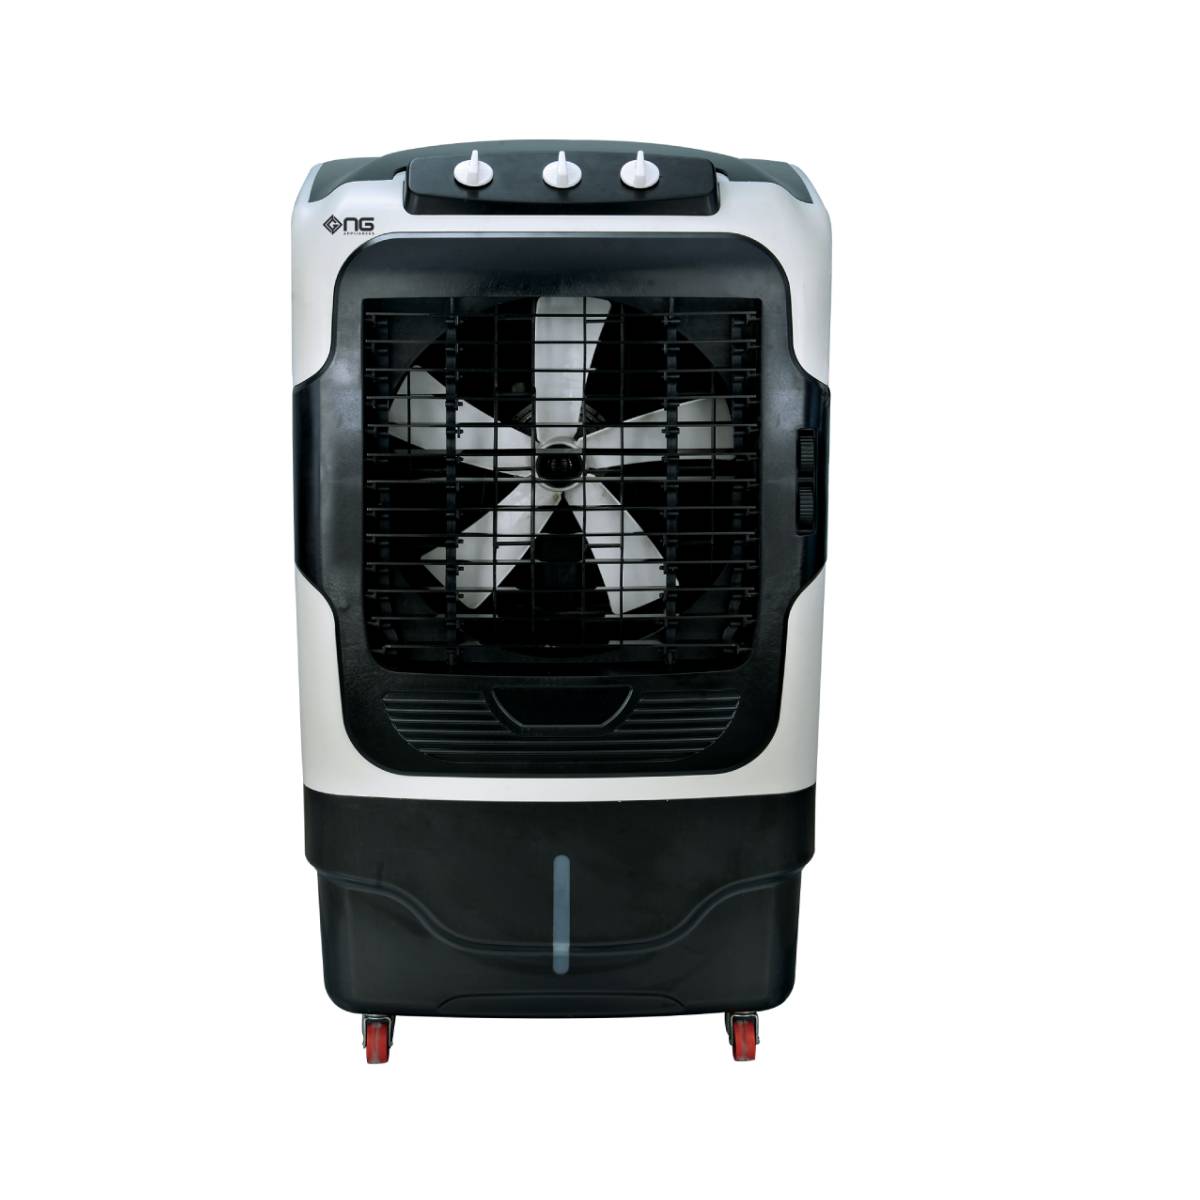 Nasgas Room Air Cooler NAC-9400 220 Volt Unique & Stylish Design Cooling With ice Box 1 Year Brand Warranty